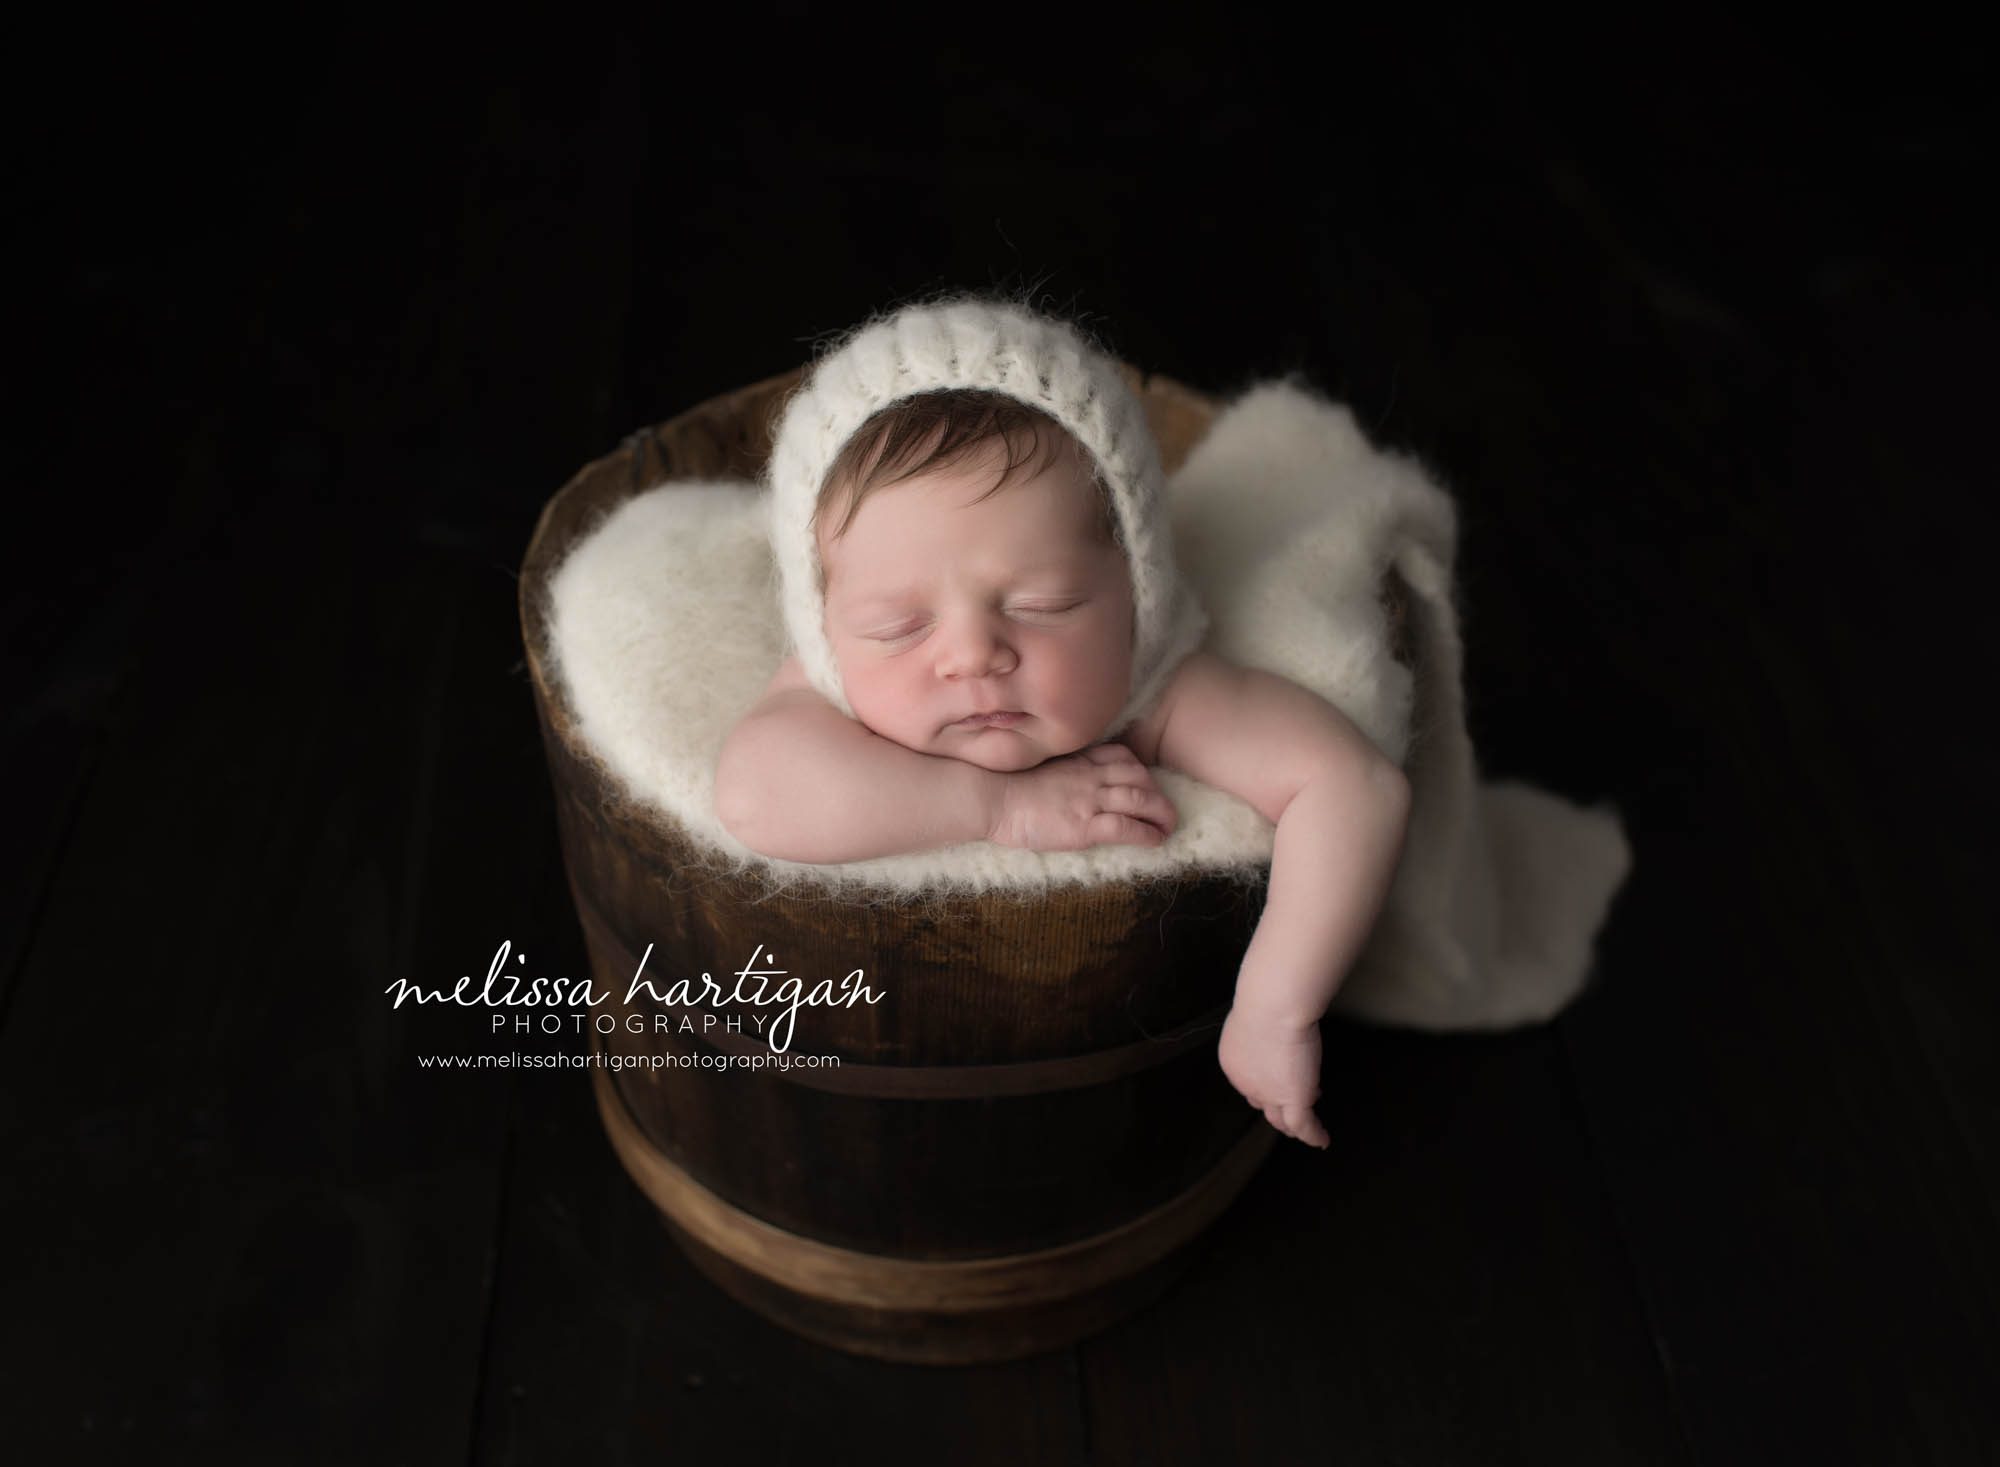 Melissa Hartigan Photography Connecticut Newborn Photographer Coventry Ct Middlefield CT baby Fairfield county Newborn and maternity CT photographer Baby girl in wooden bucket with white knit hat and blanket with arm hanging out